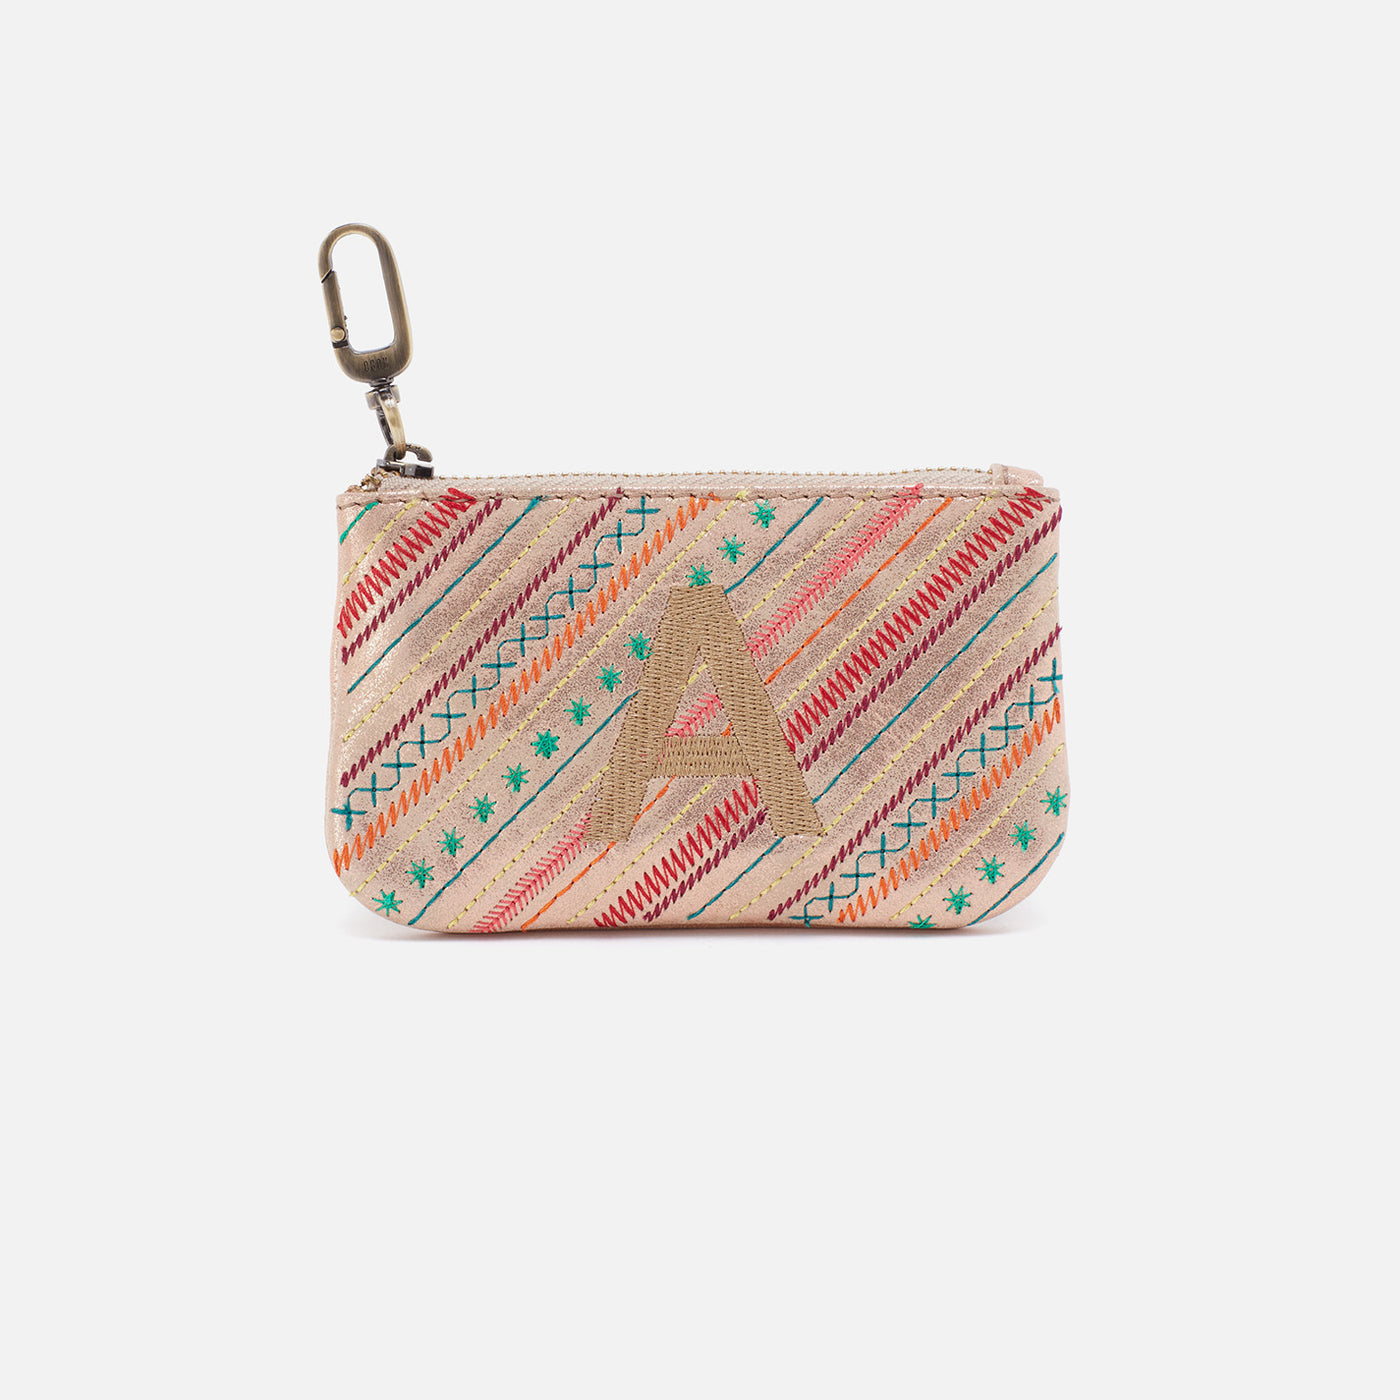 Monogram Pouch in Metallic Soft Leather - A